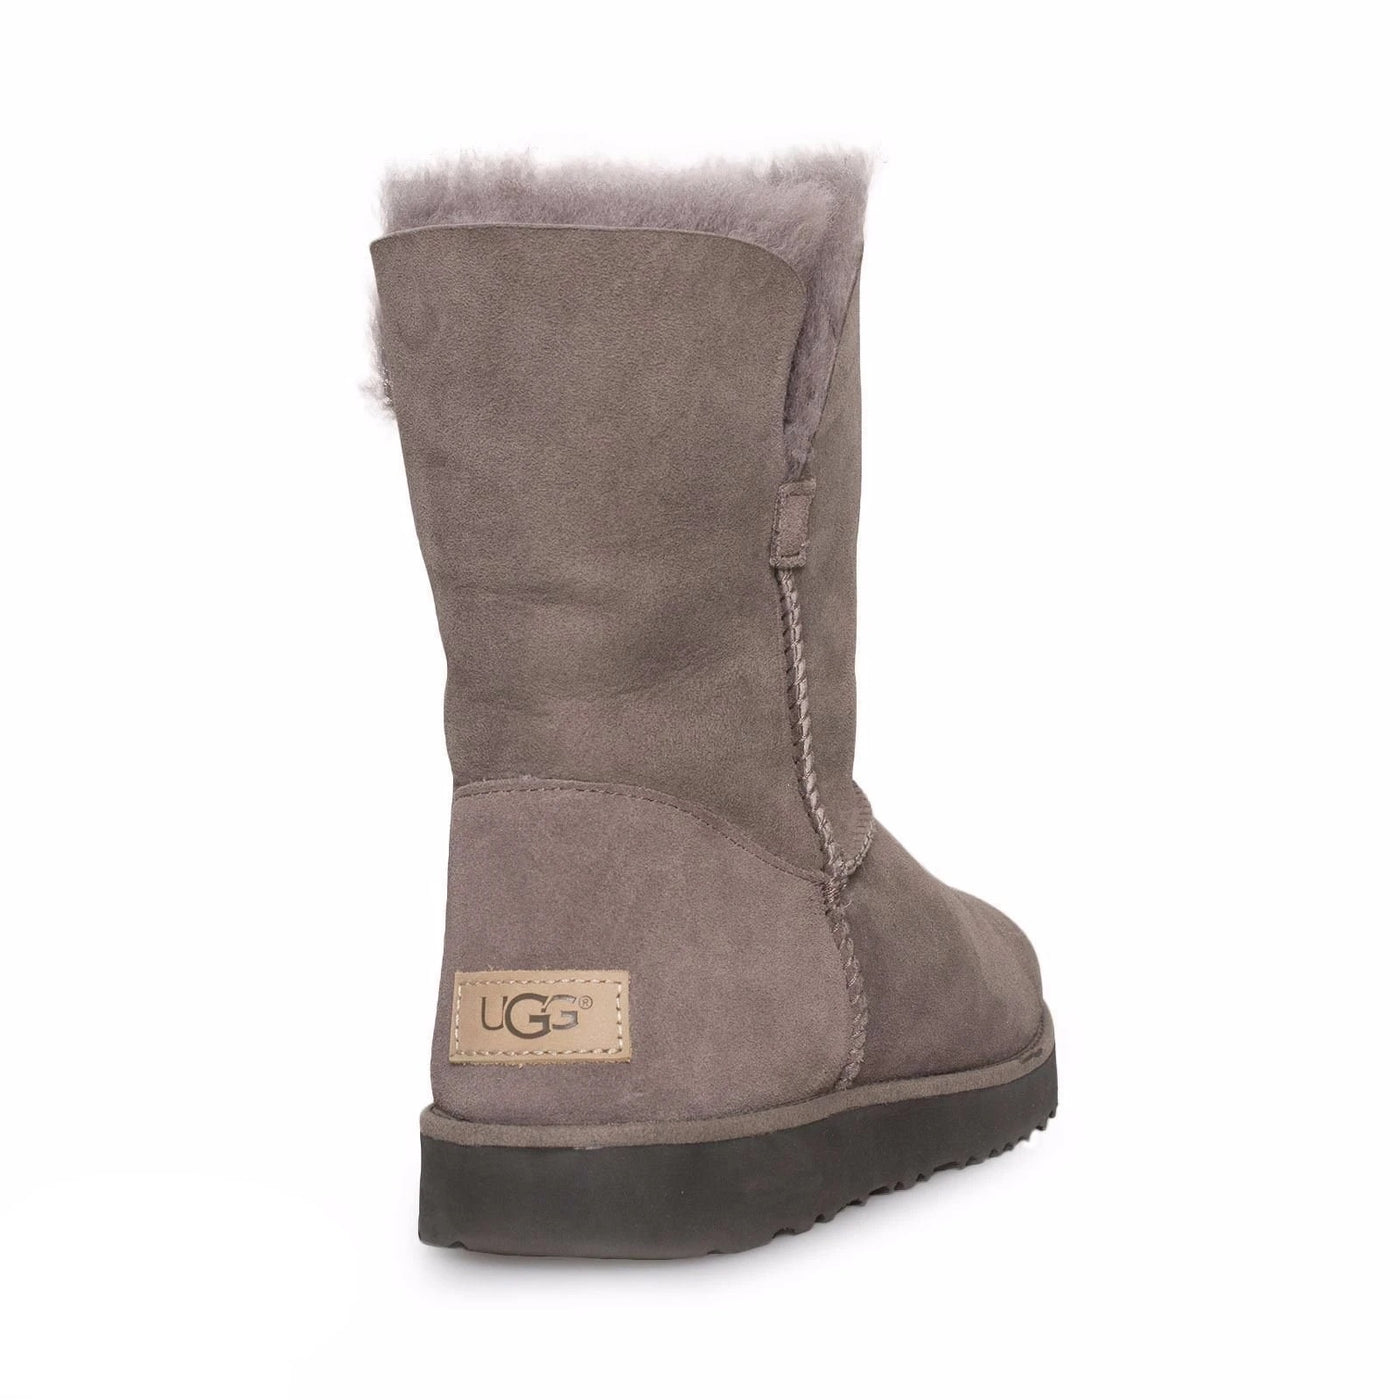 UGG Women's Classic Cuff Short Winter Boots in Stormy Grey